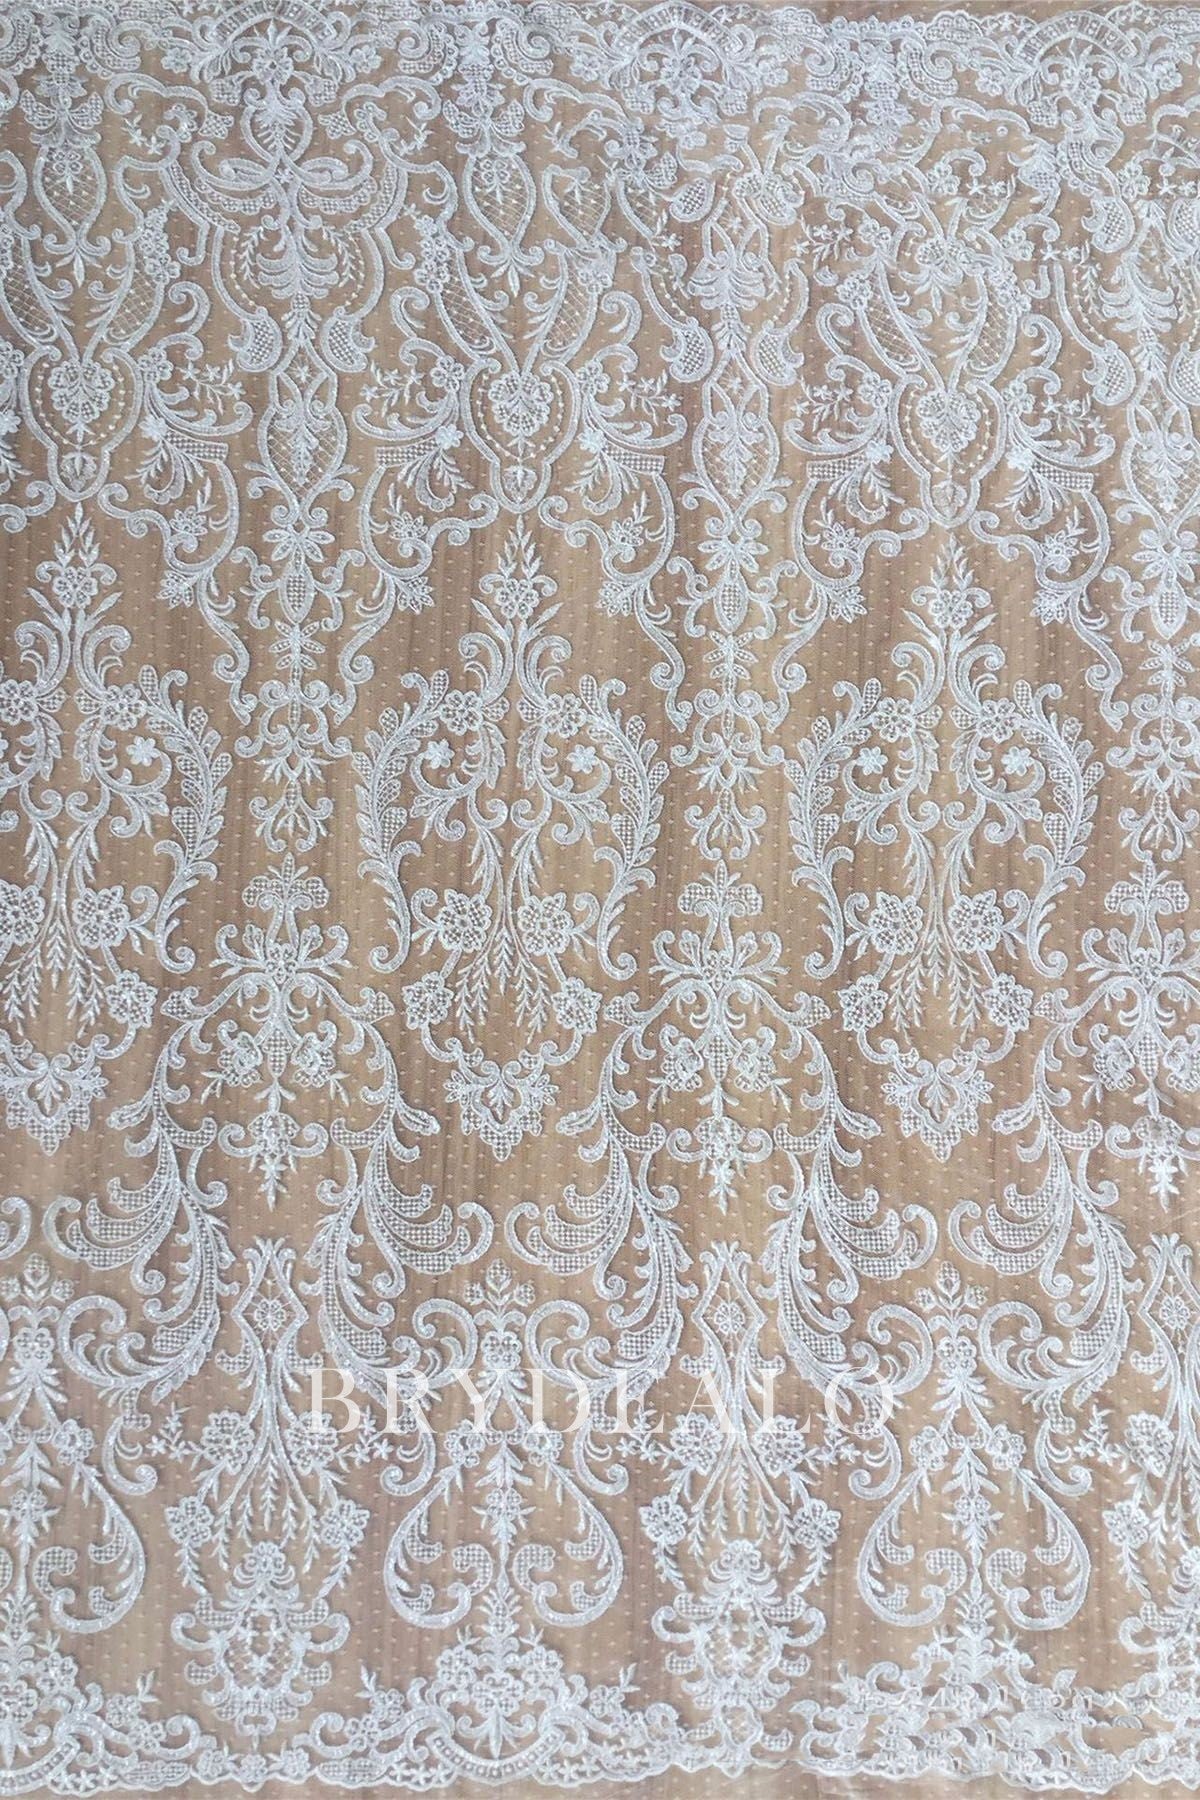  Symmetrical Corded Lace Fabric